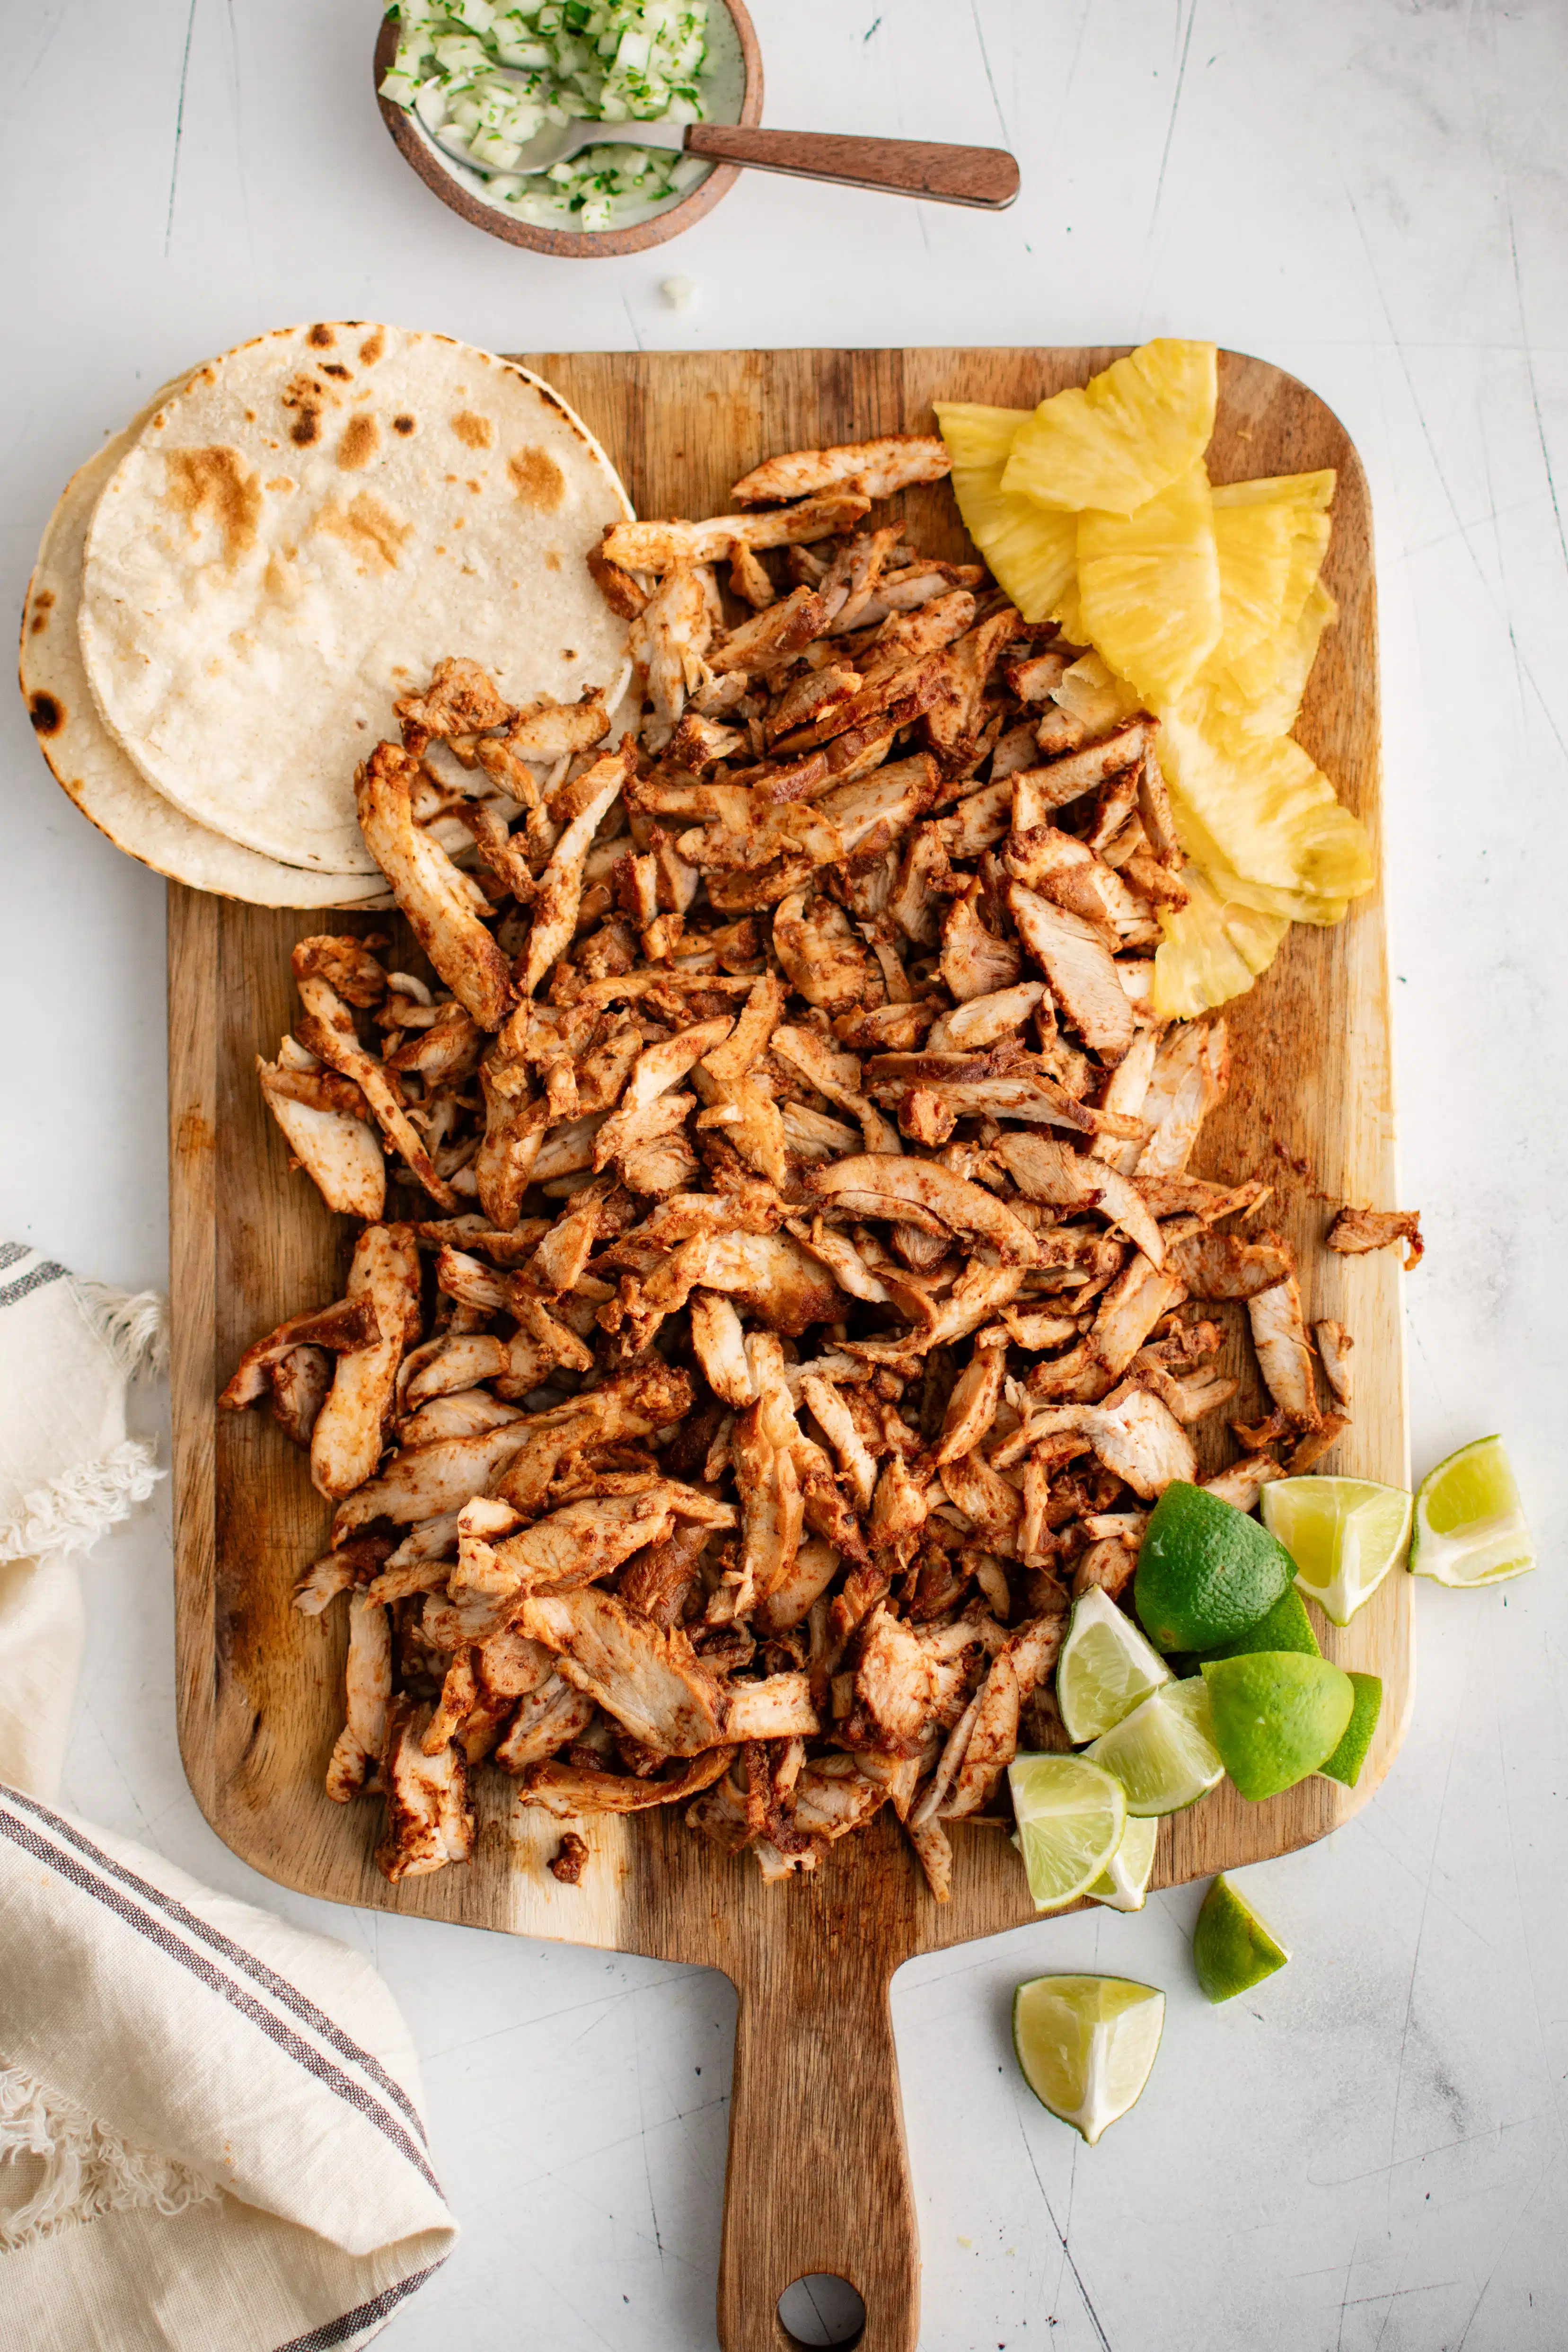 Thinly sliced chicken al pastor arranged over a large cutting board and served with sliced pineapple, flour tortillas, and lime wedges.